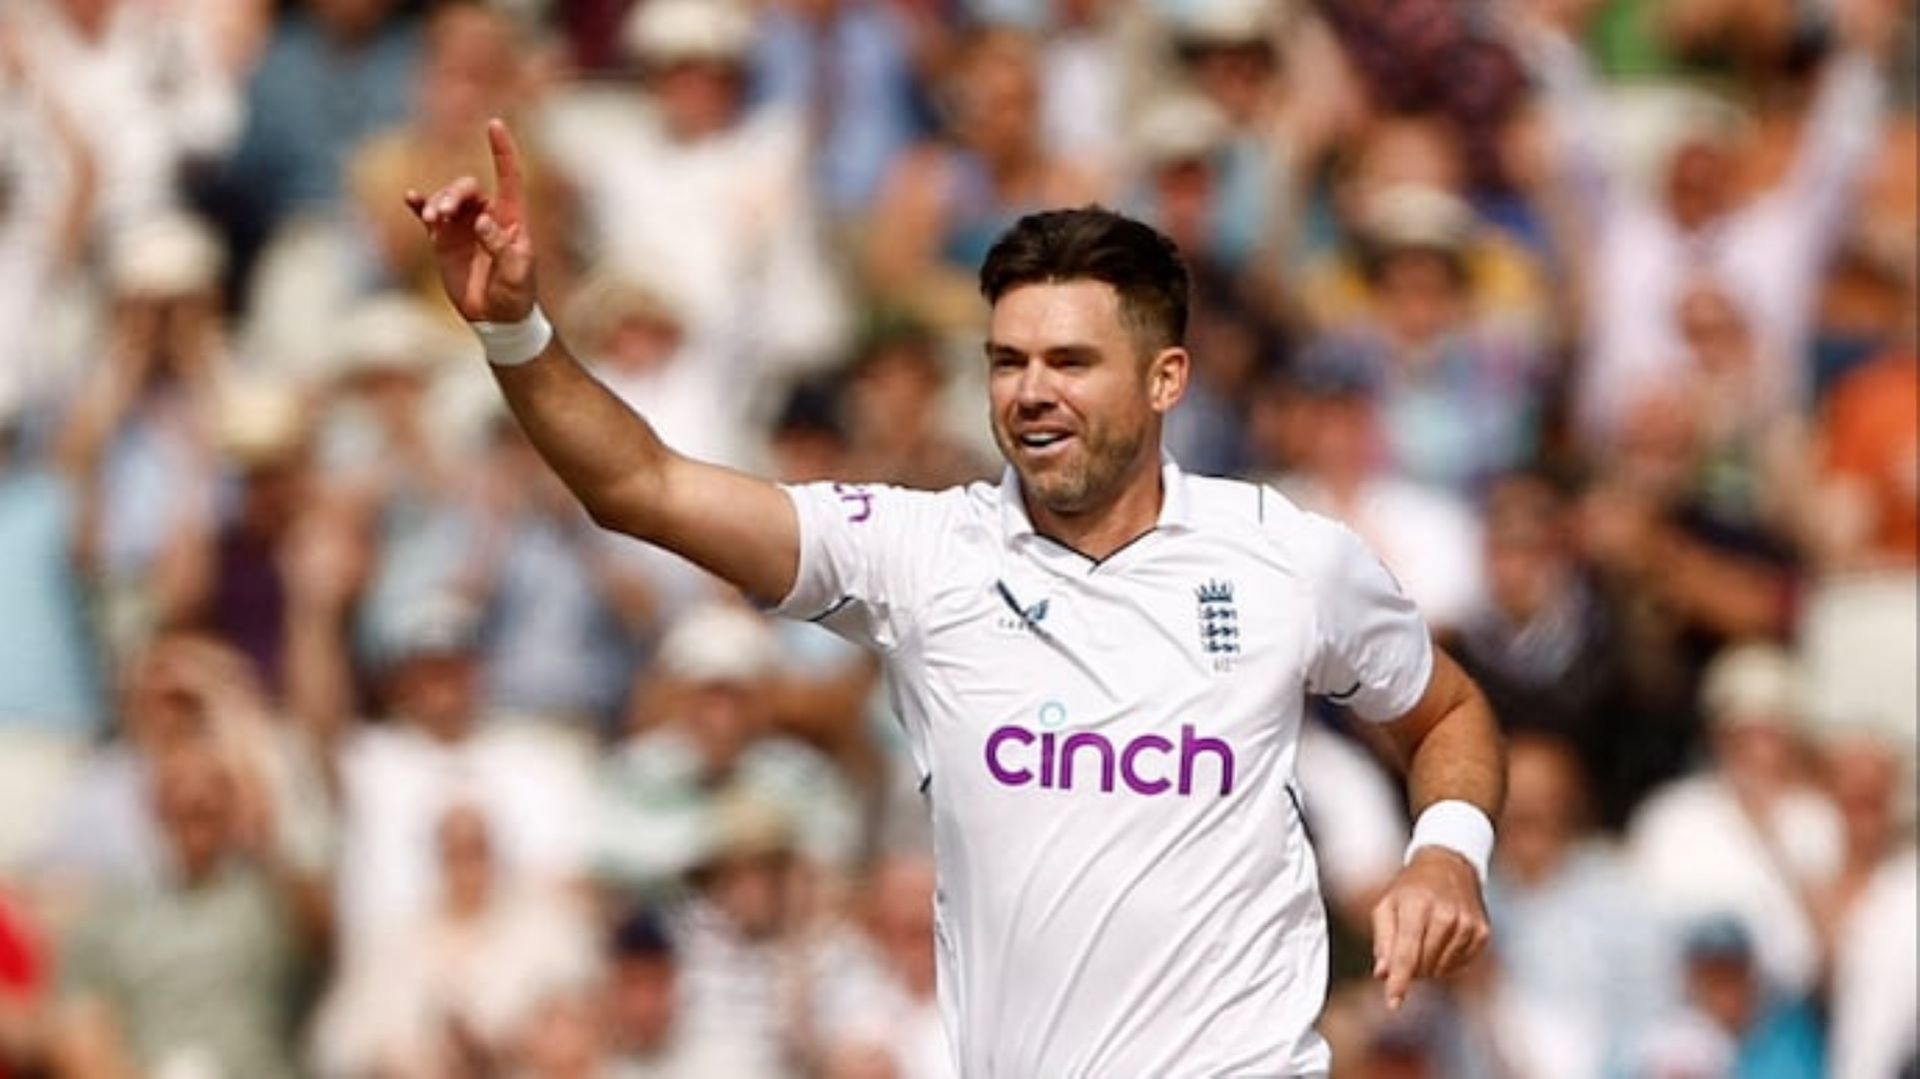 Anderson will look to help England regain the Ashes